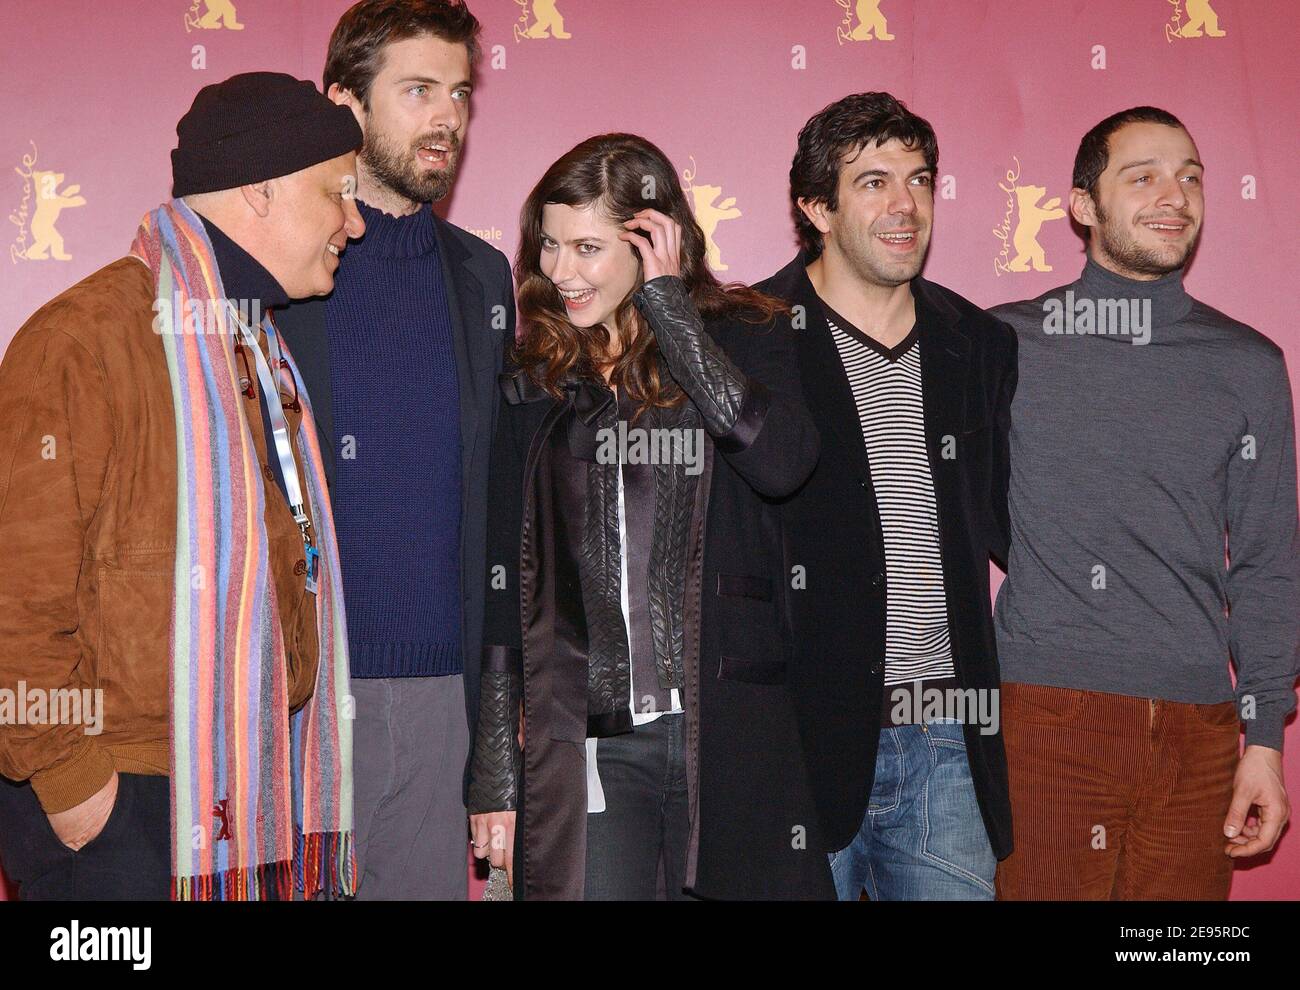 (L to R) Italian movie director Michele Placido, British actor Kim Rossi Stuart, French actress Anna Mouglalis, Italian actor Pierfrancesco Favino and Italian actor Claudio Santamaria pose during the photocall of the movie 'Romanzo Criminale' during the 56th Berlinale, International Film Festival in Berlin, Germany on February 15, 2006. Photo by Bruno Klein/ABACAPRESS.COM Stock Photo